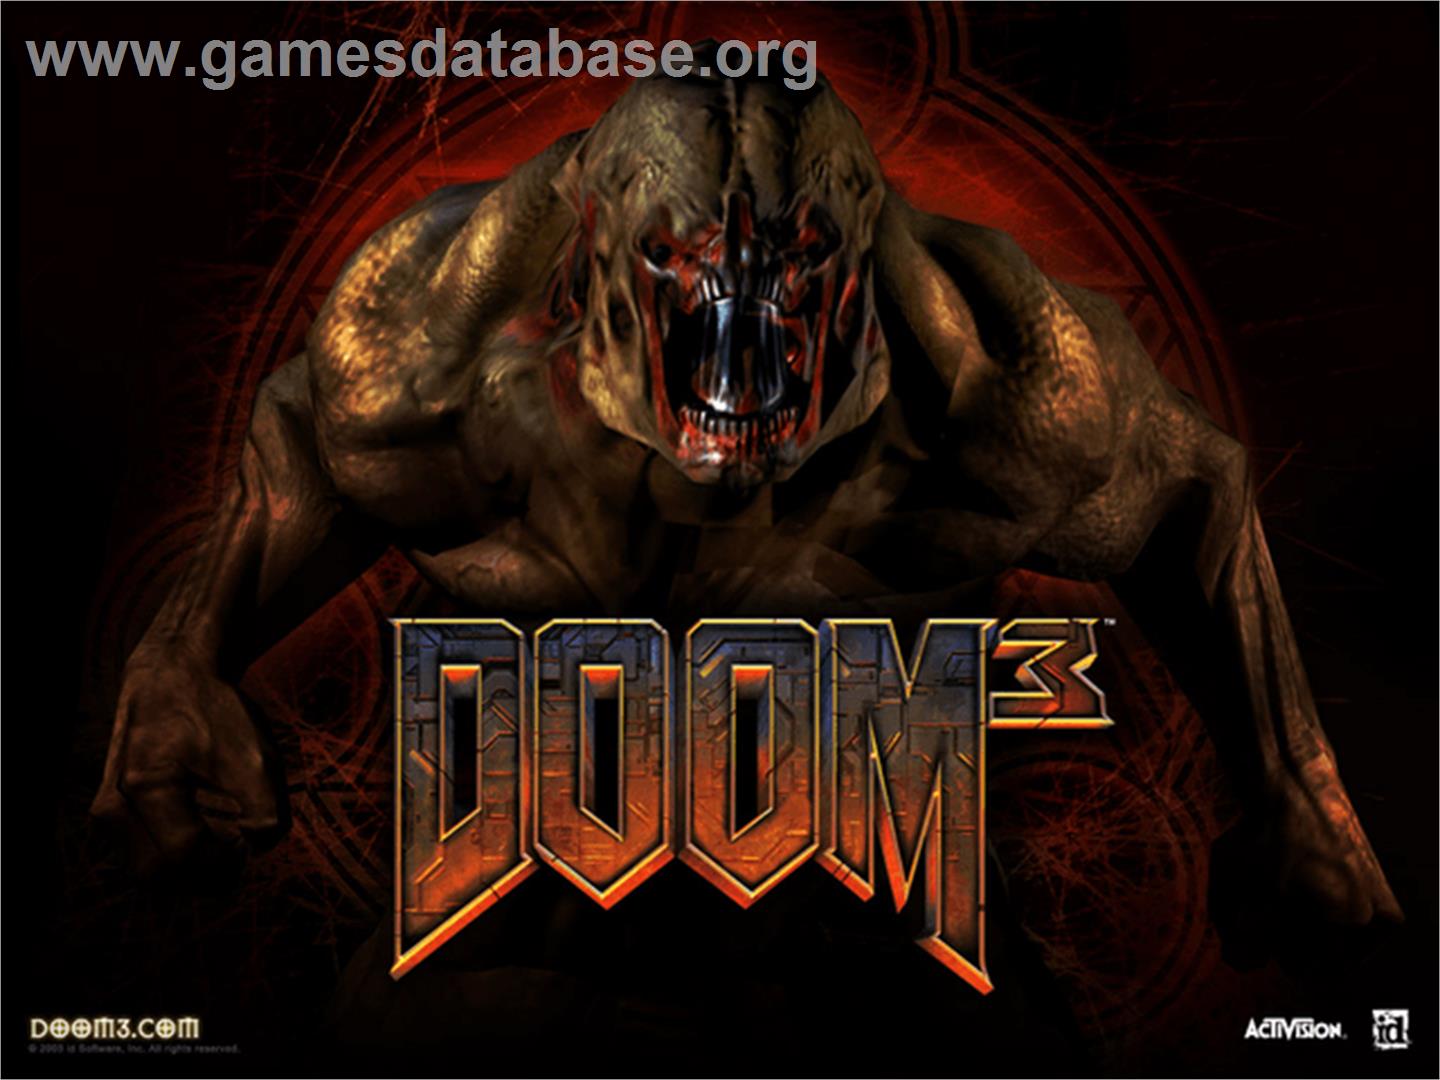 DOOM³ (Limited Collector's Edition) - Microsoft Xbox - Artwork - Title Screen